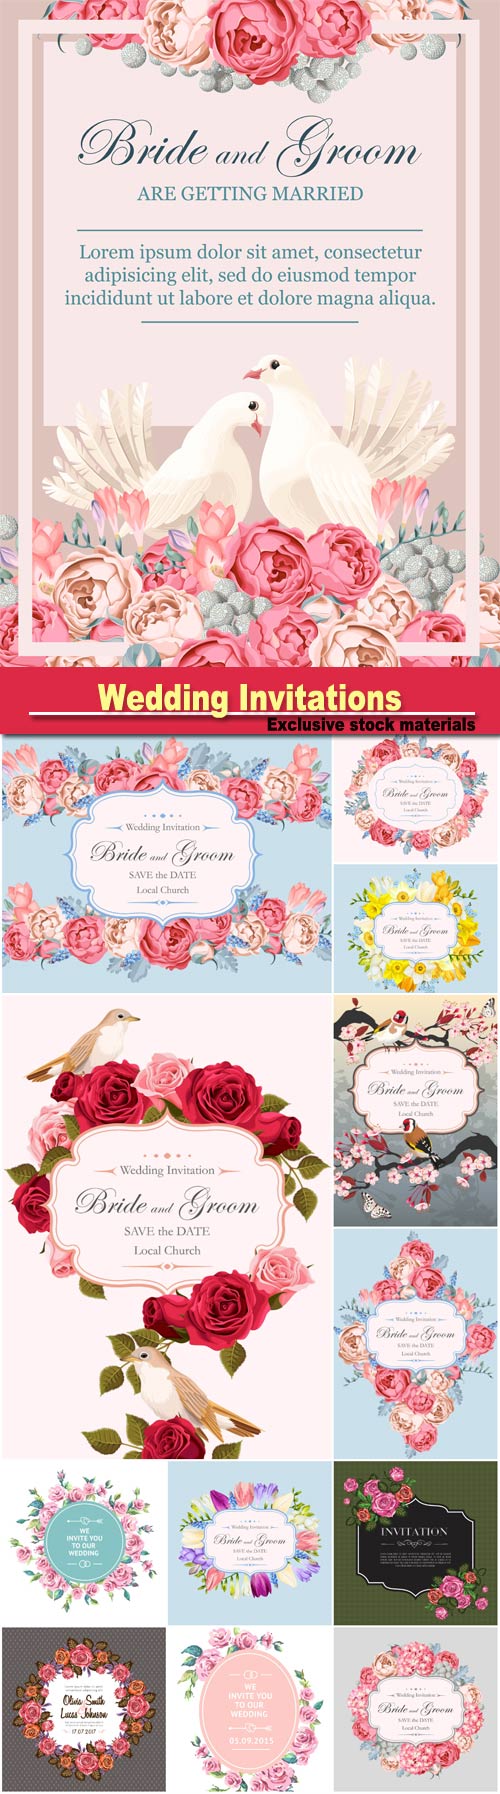 Wedding Invitations with flowers vintage frame